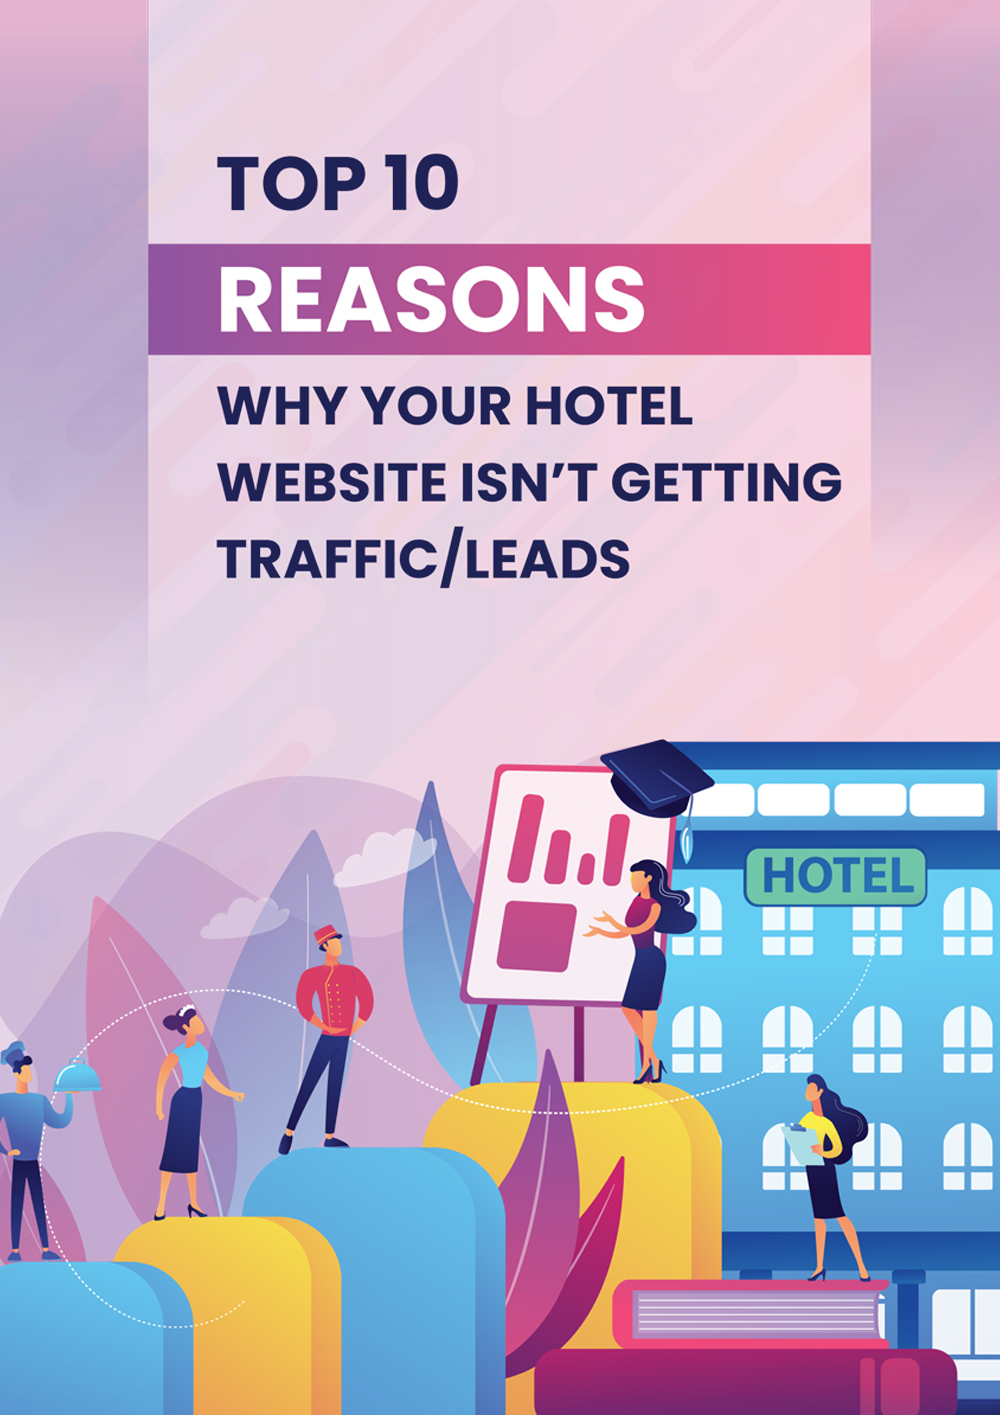 Top 10 Reasons Why Your Hotel Website Isn’t Getting Traffic Leads